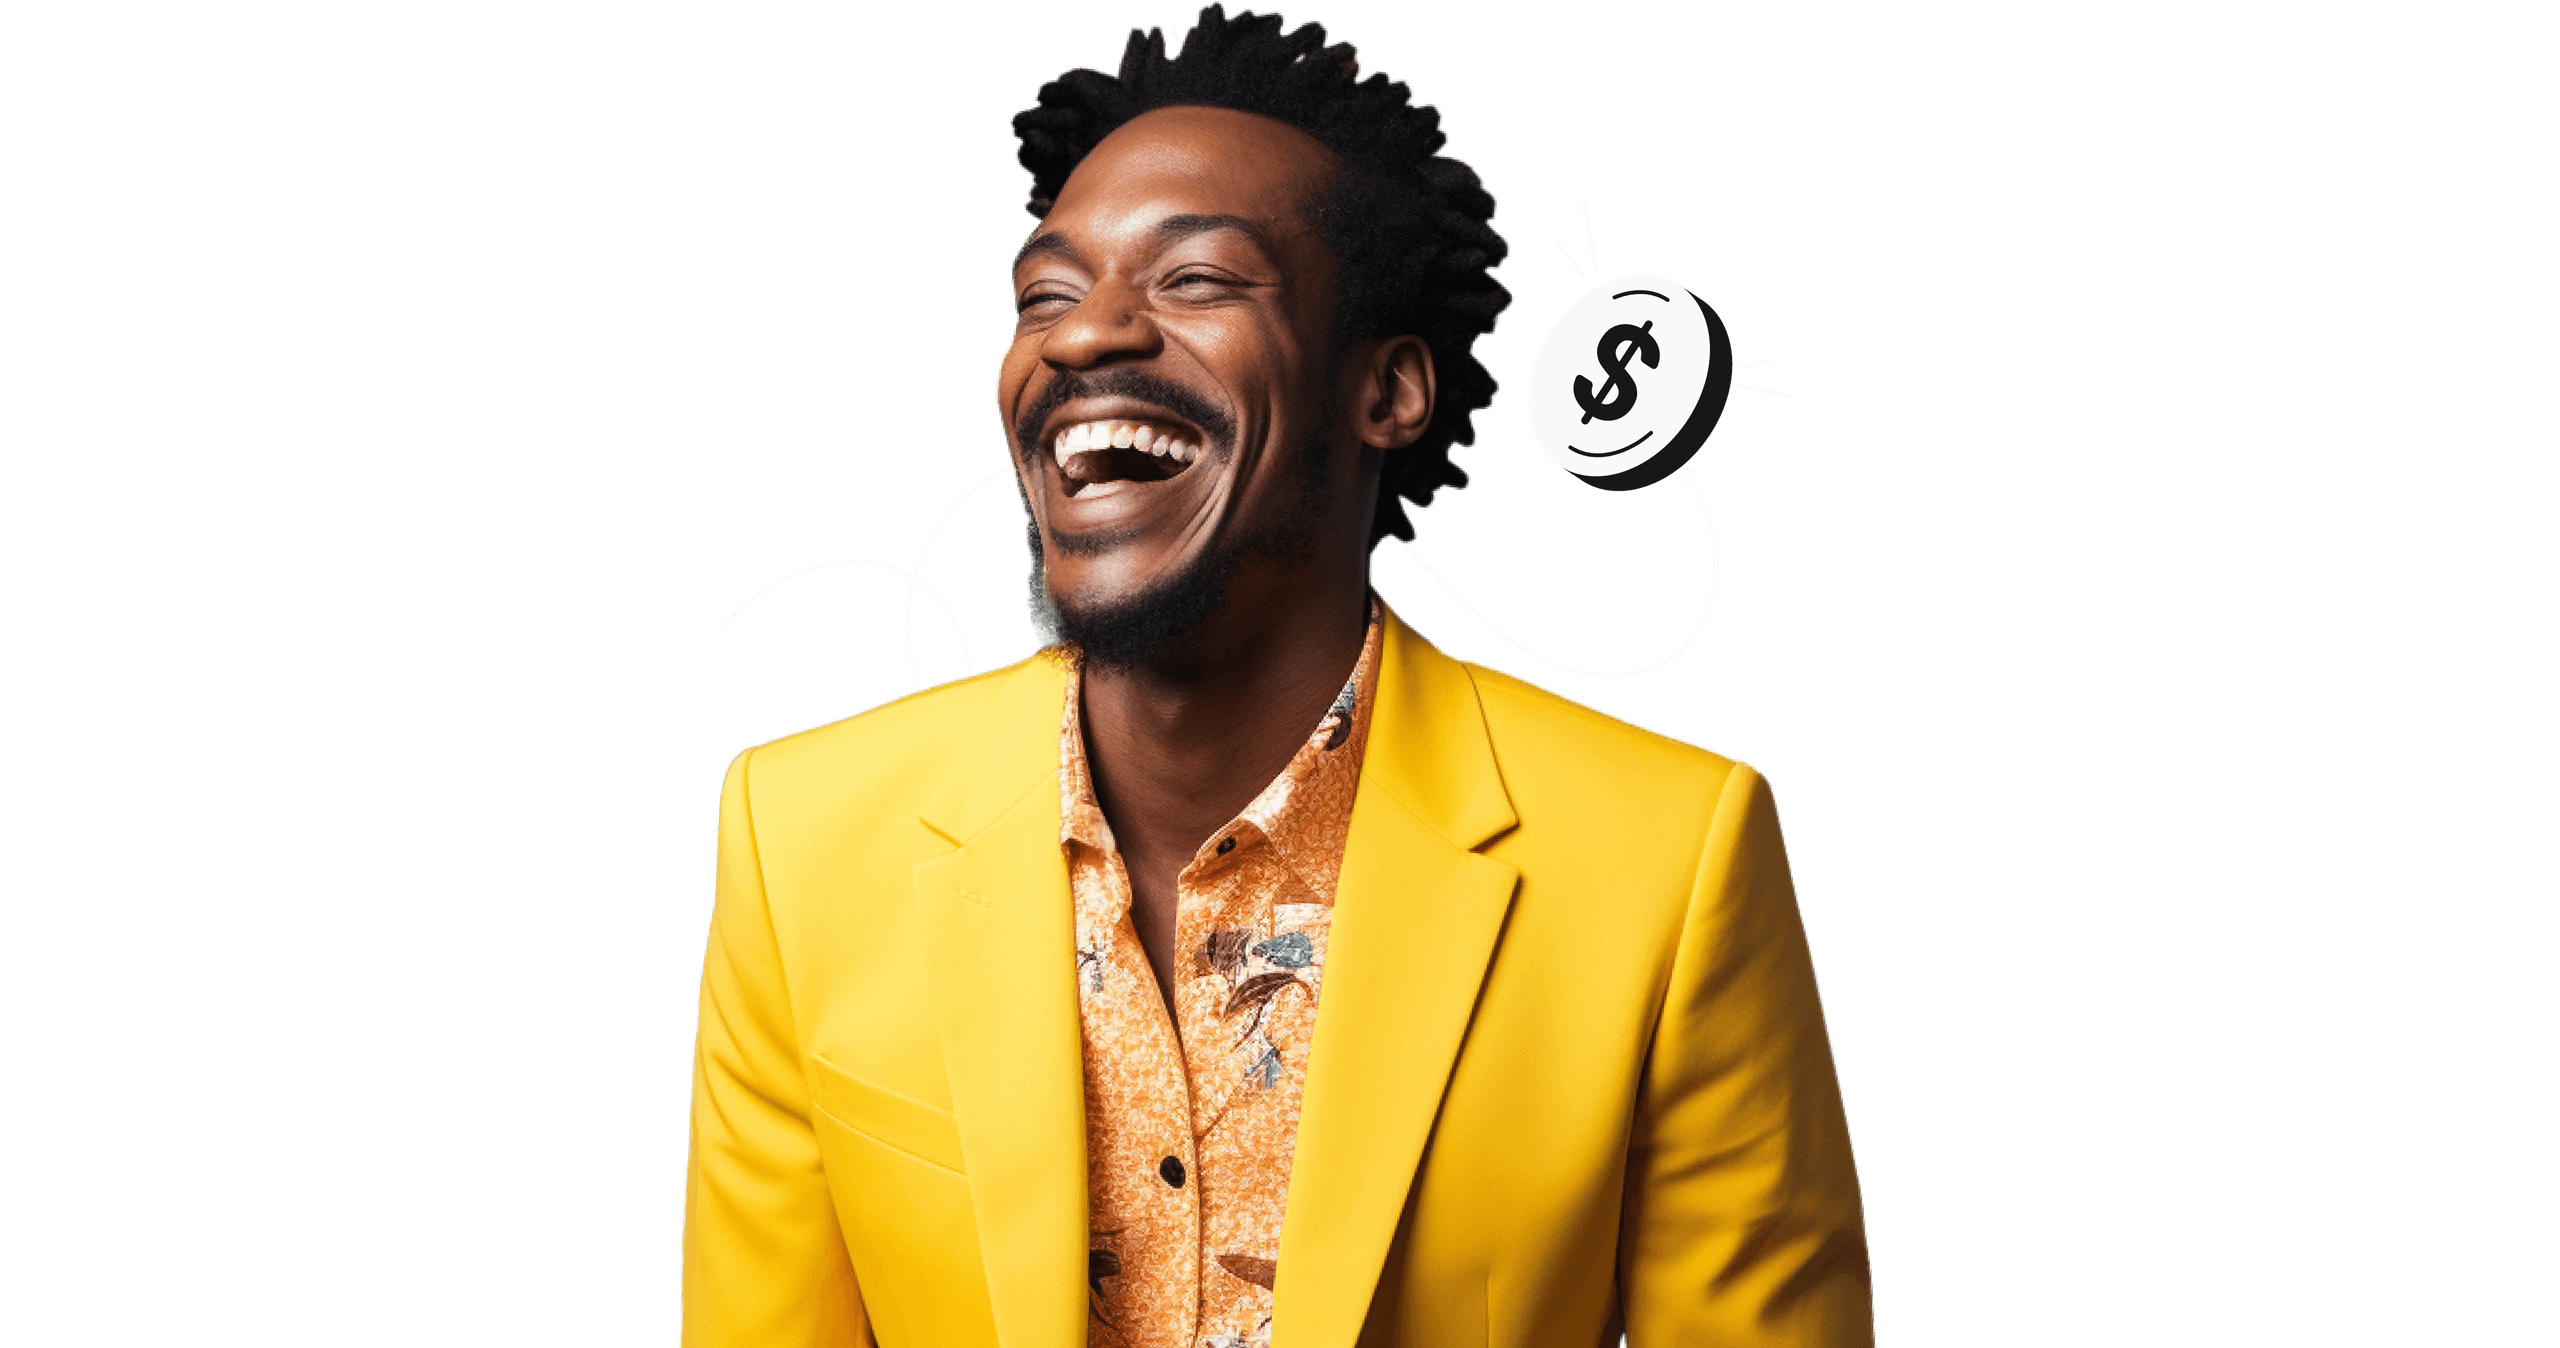 A laughing man in a yellow jacket.